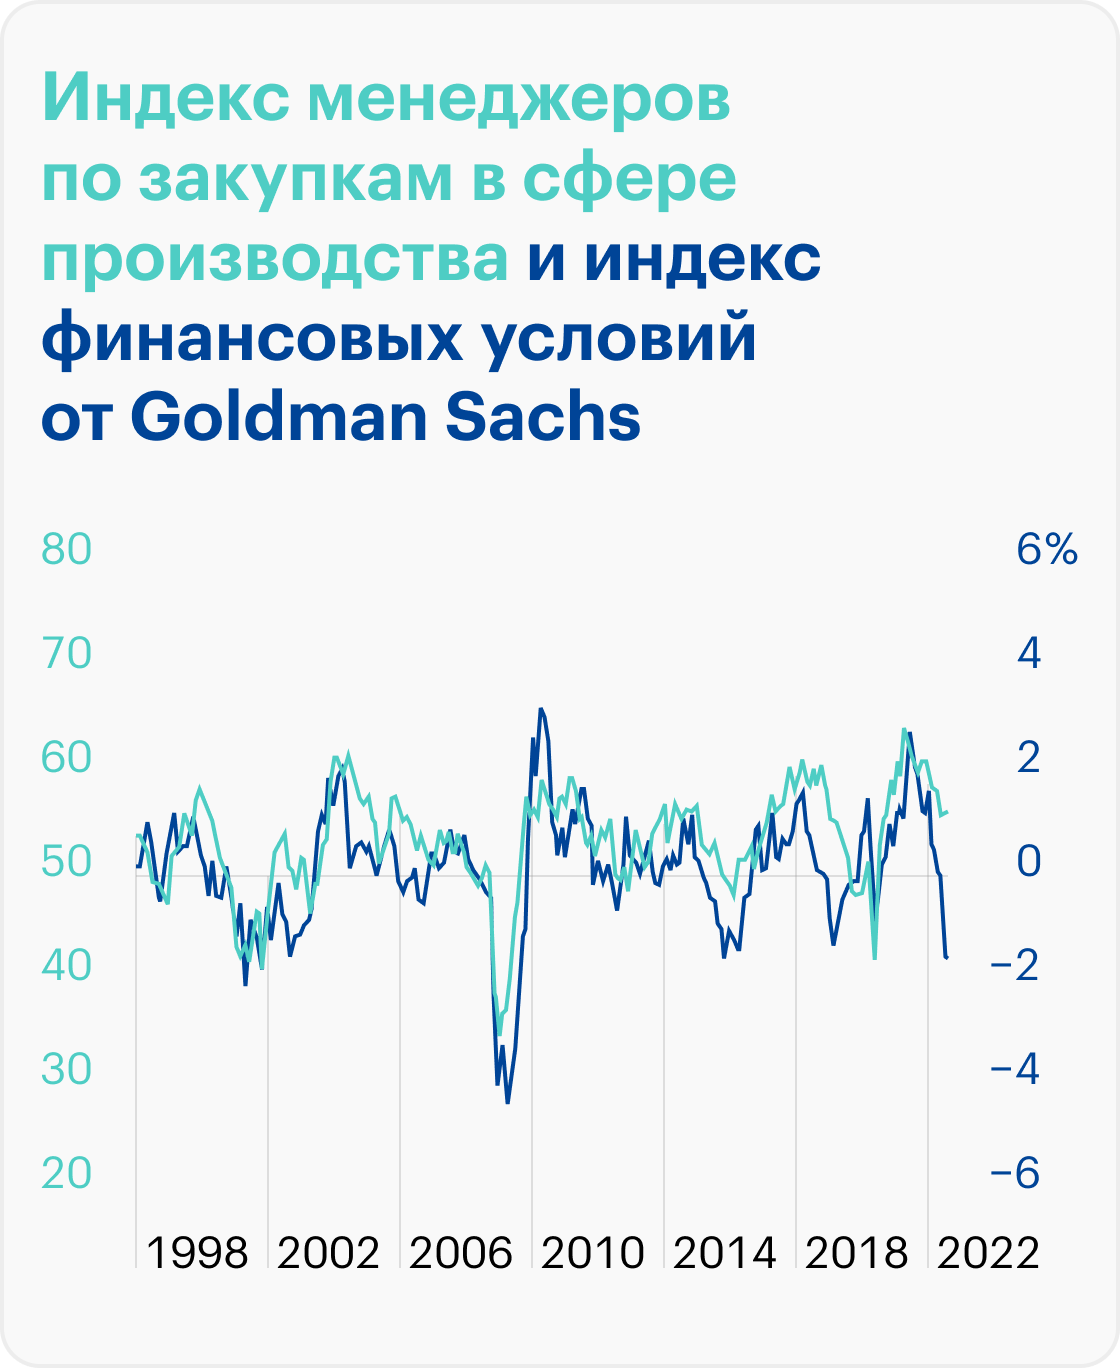 Источник: Daily Shot, Tight financial conditions